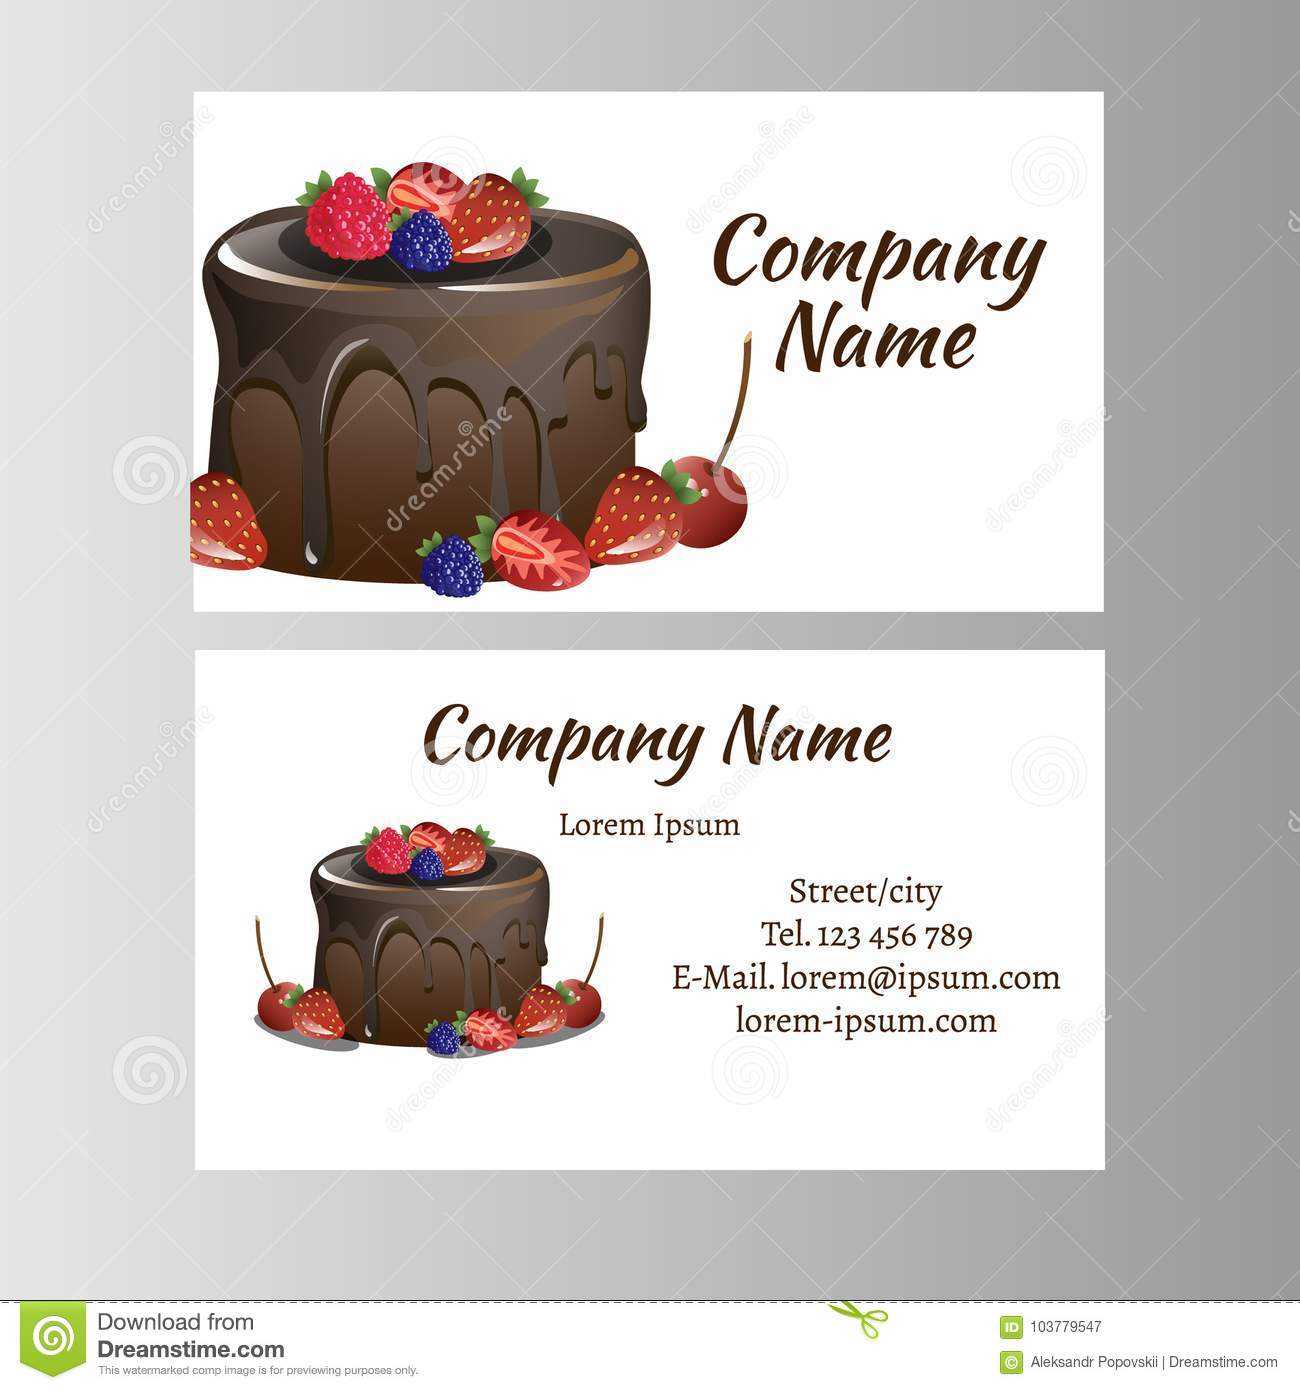 Business Card Template For Bakery Business. Stock Vector Throughout Cake Business Cards Templates Free